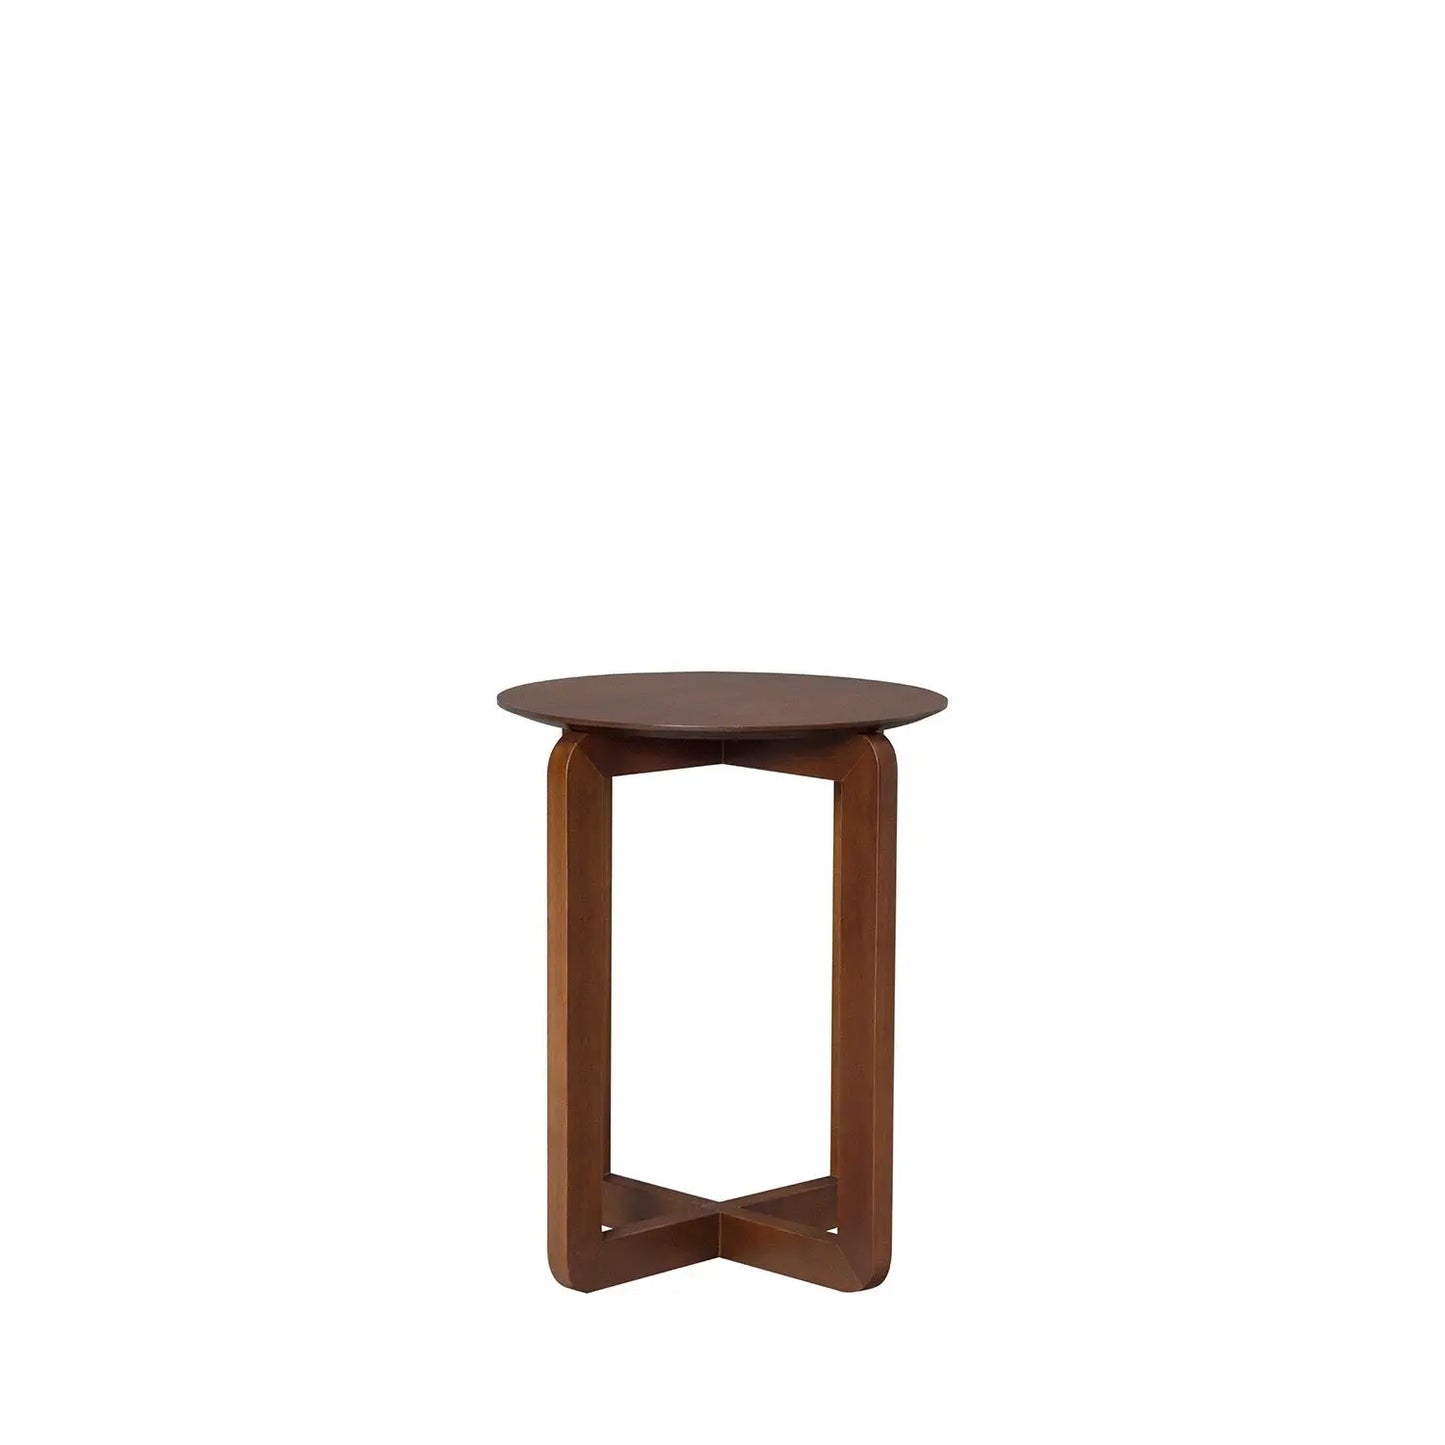 Homedock Mesa Lateral Tours 70 cm - Natural Fratter